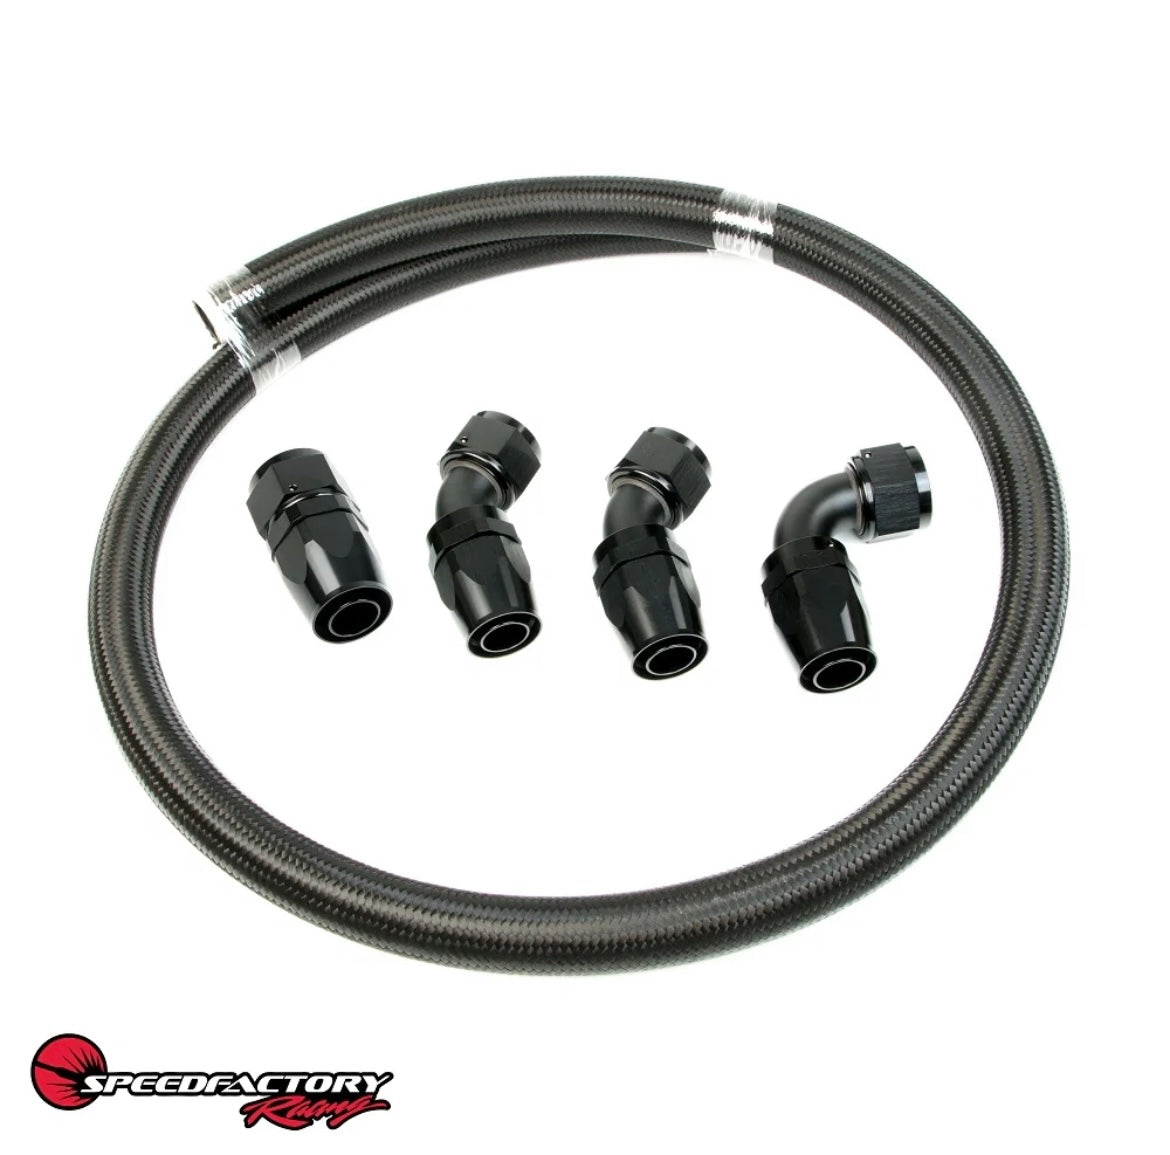 SpeedFactory Racing Universal Race Radiator -16 AN Hose and Fitting Kit For B / D / F / H / K / J-Series